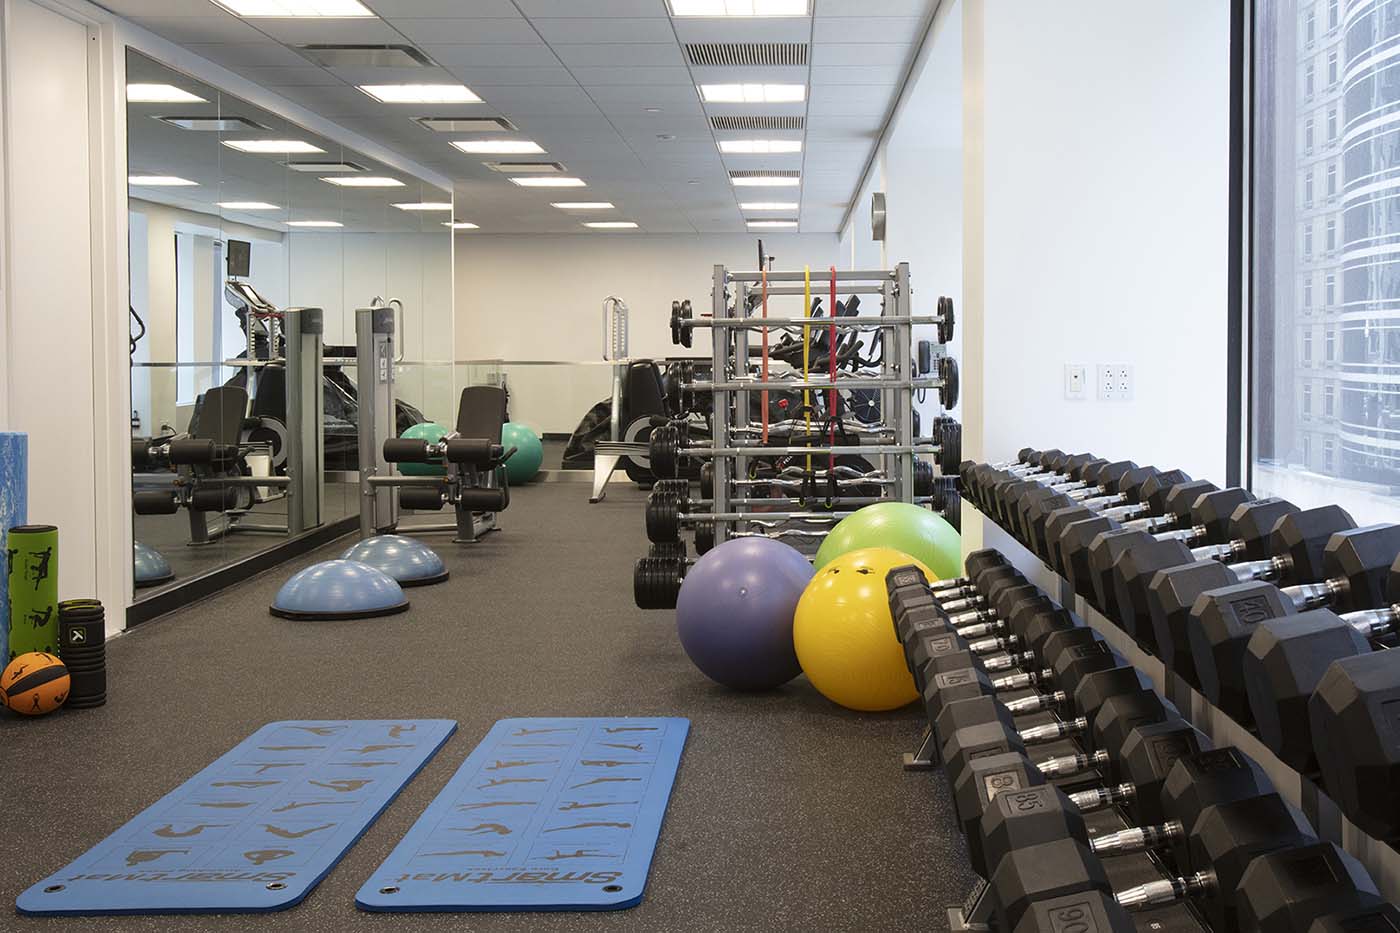 Onsite gym including free weights, weight and cardio machines, and more.